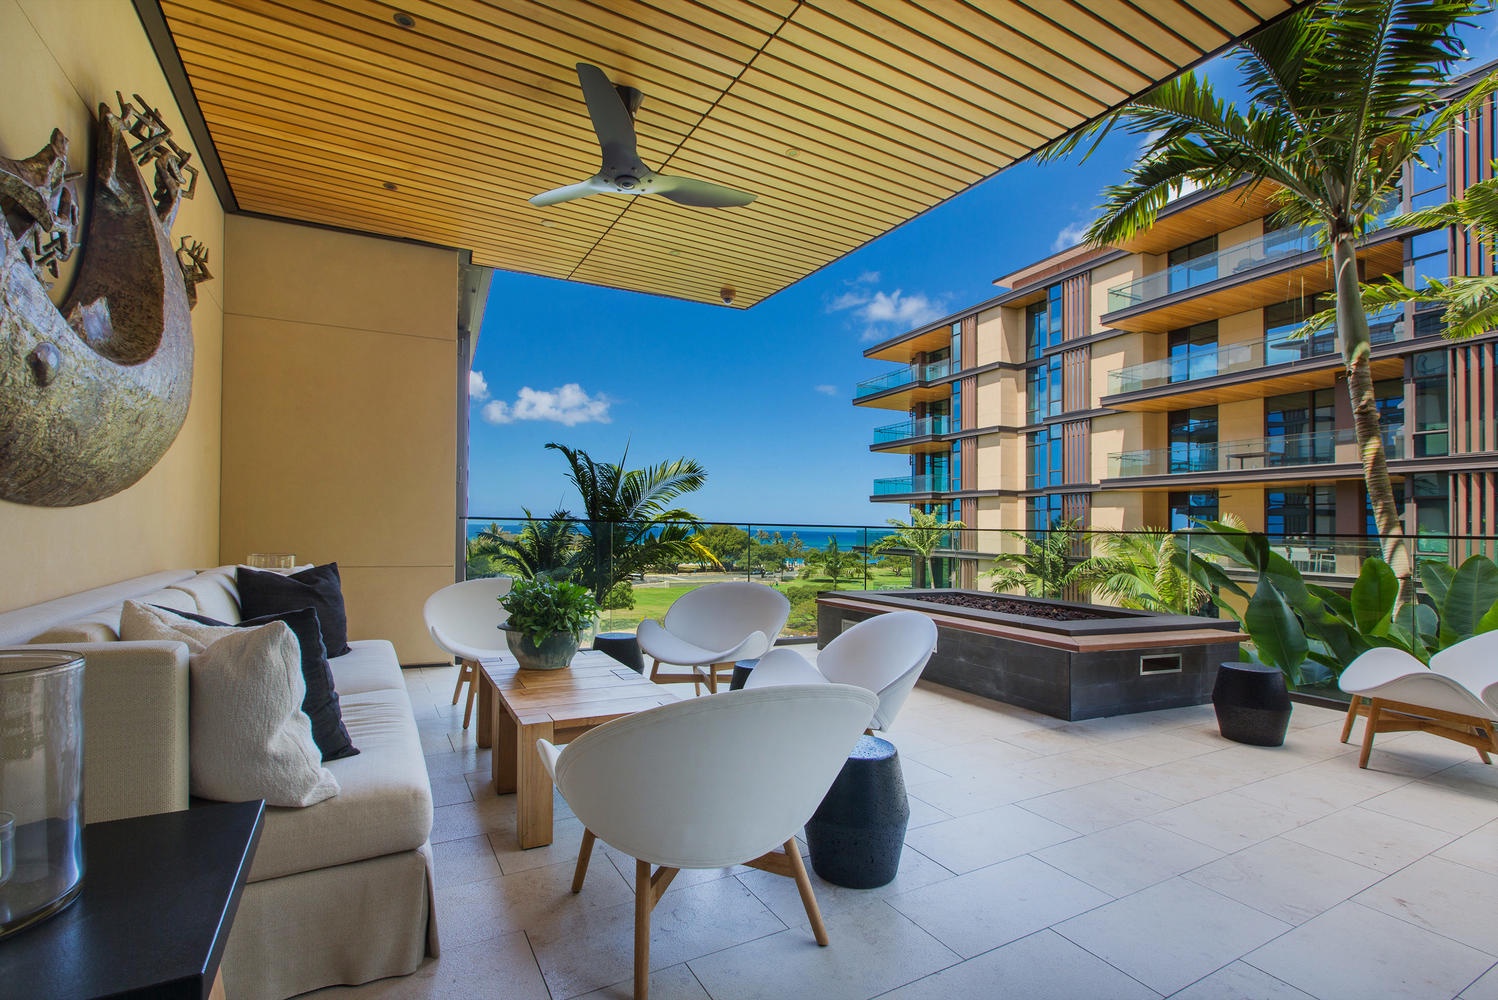 Honolulu Vacation Rentals, Park Lane Sky Resort - Club Lounge with lanai and fire pit